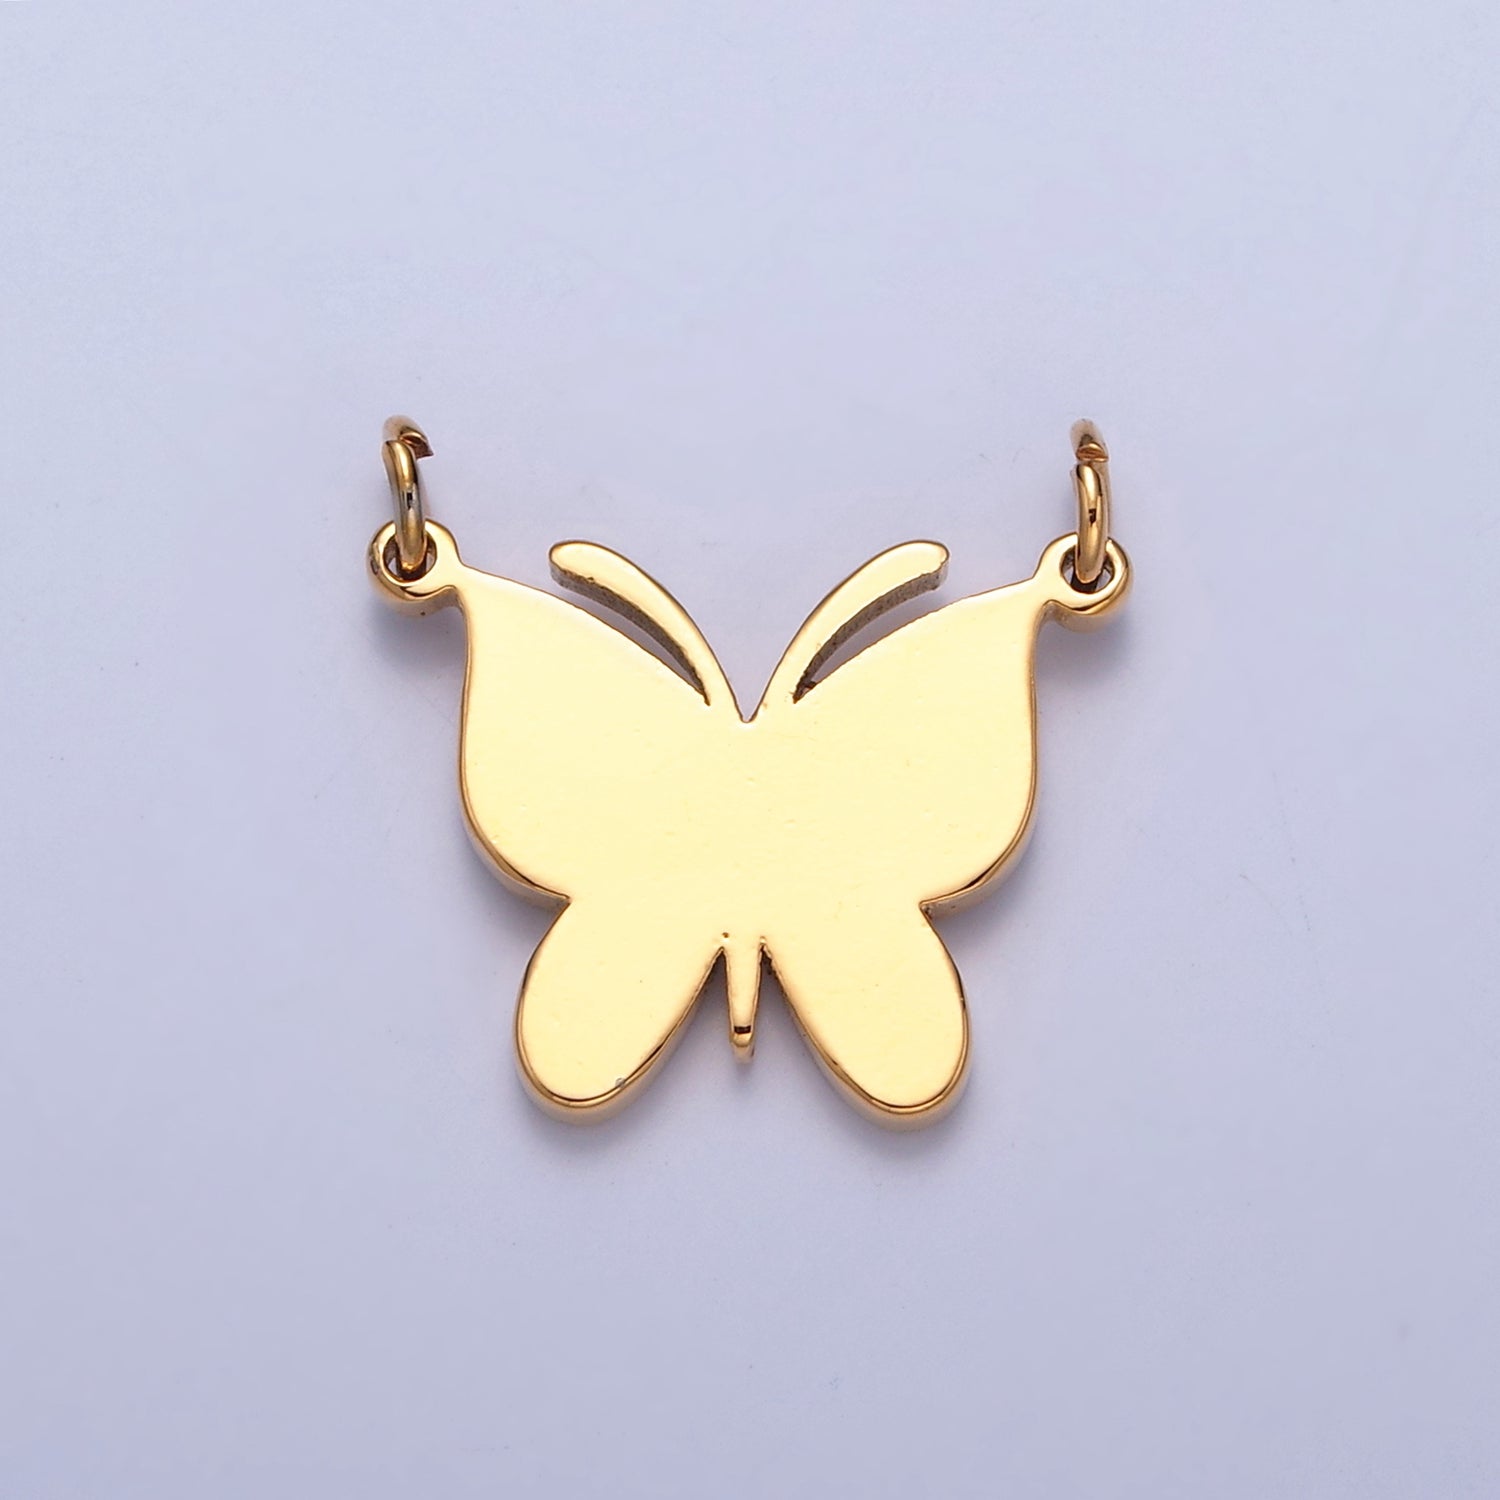 Dainty Gold Flat Butterfly Charm Connector Pendant for Necklace Bracelet 14K or 24K Gold Filled W-570 - DLUXCA